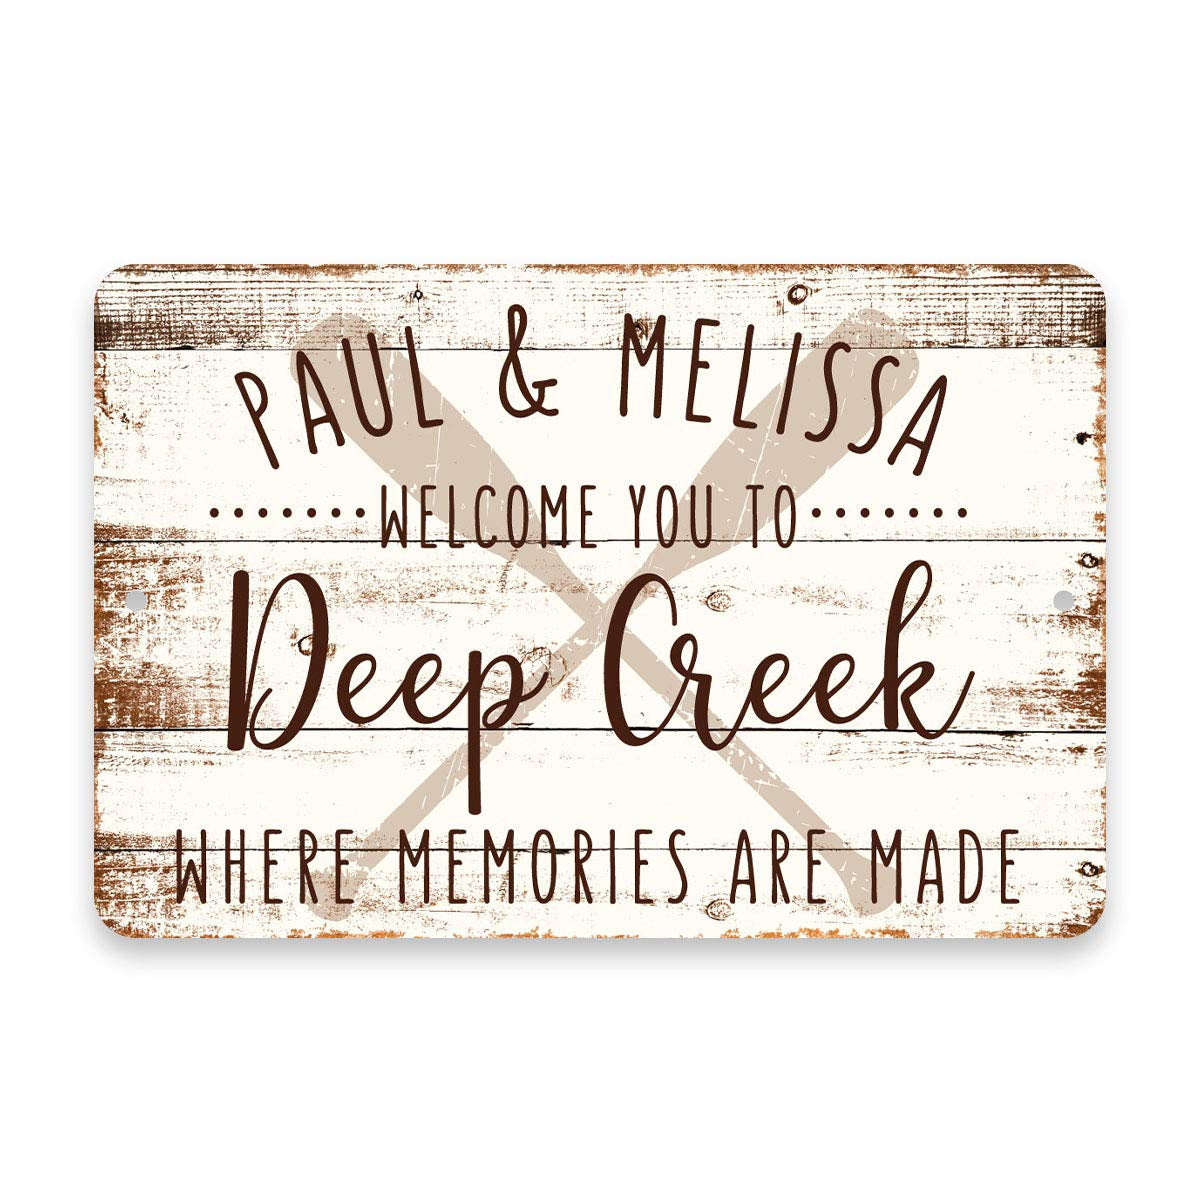 Personalized Welcome to Deep Creek Lake Where Memories are Made Sign - 8 X 12 Metal Sign with Wood Look